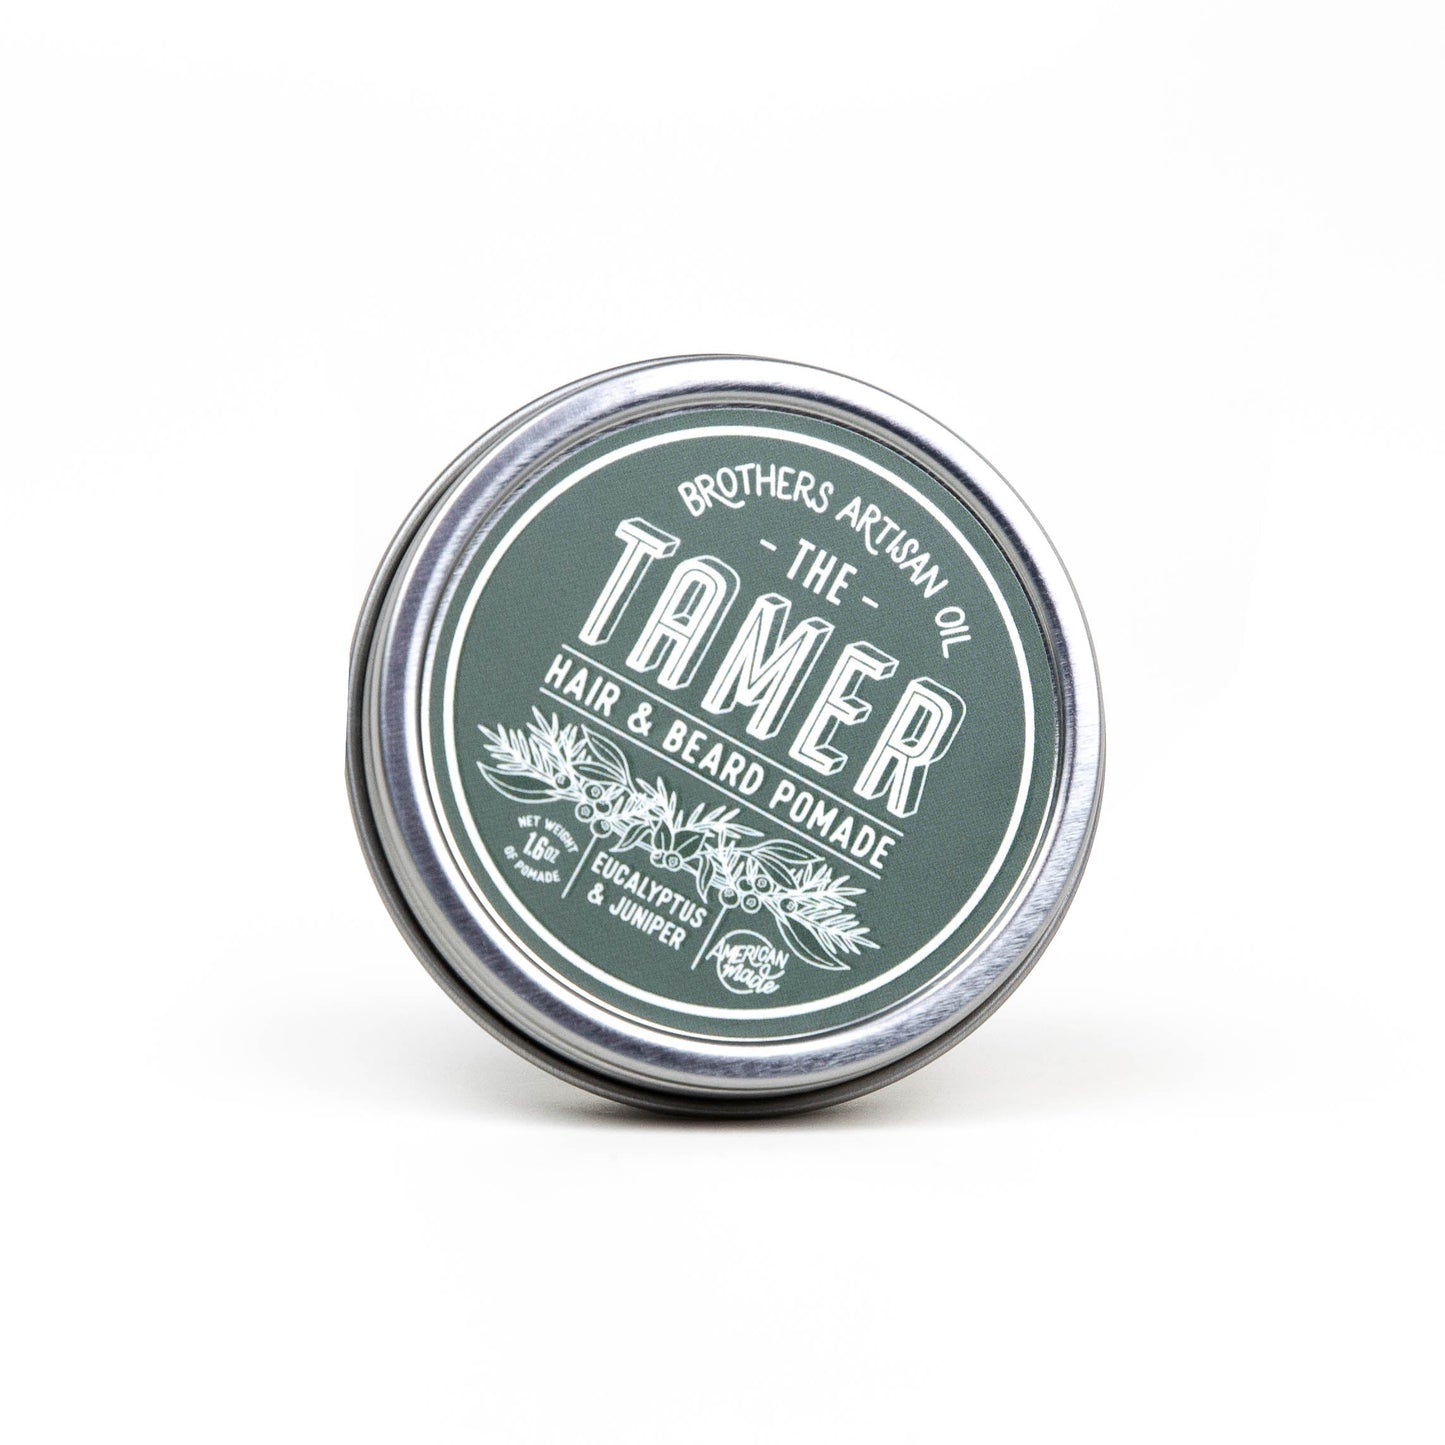 The Tamer by Brothers Artisan Oil